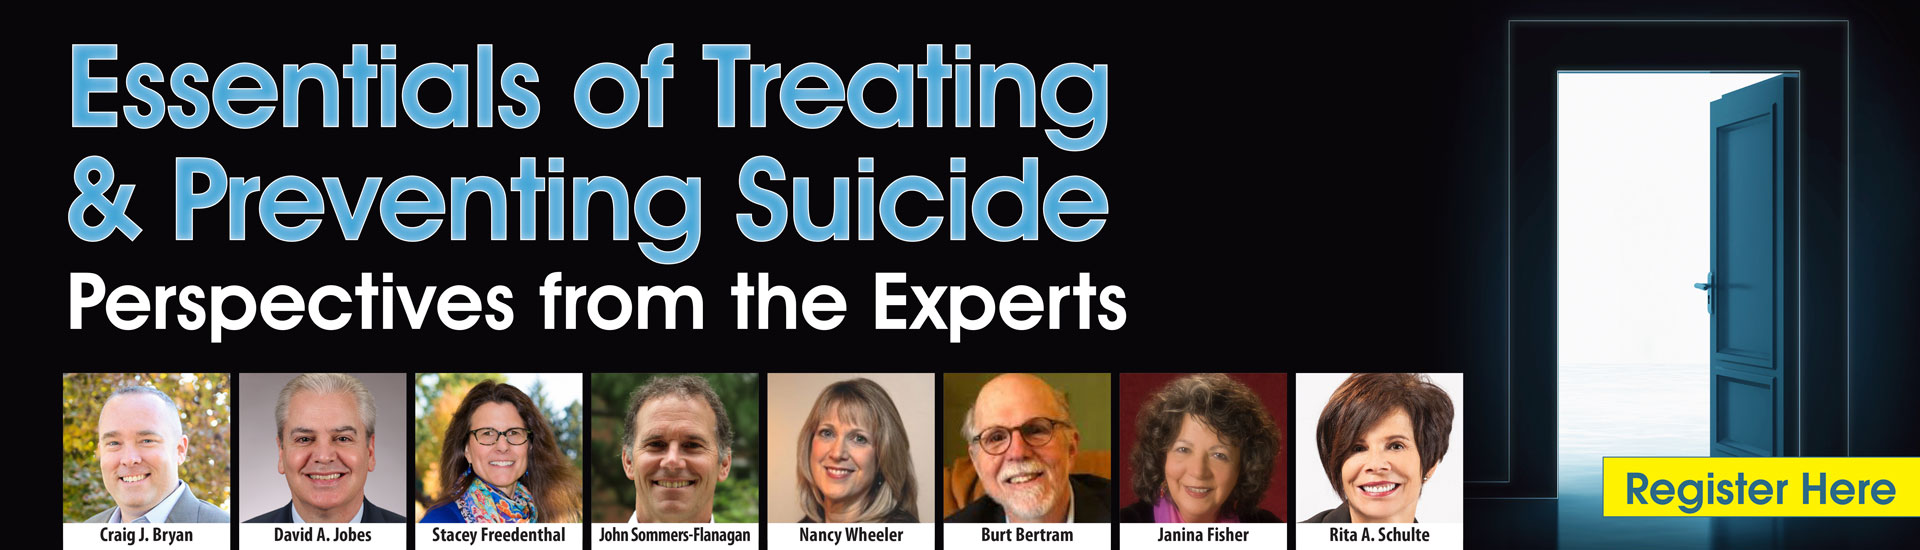 Essentials of Treating & Preventing Suicide: Perspectives from the Experts